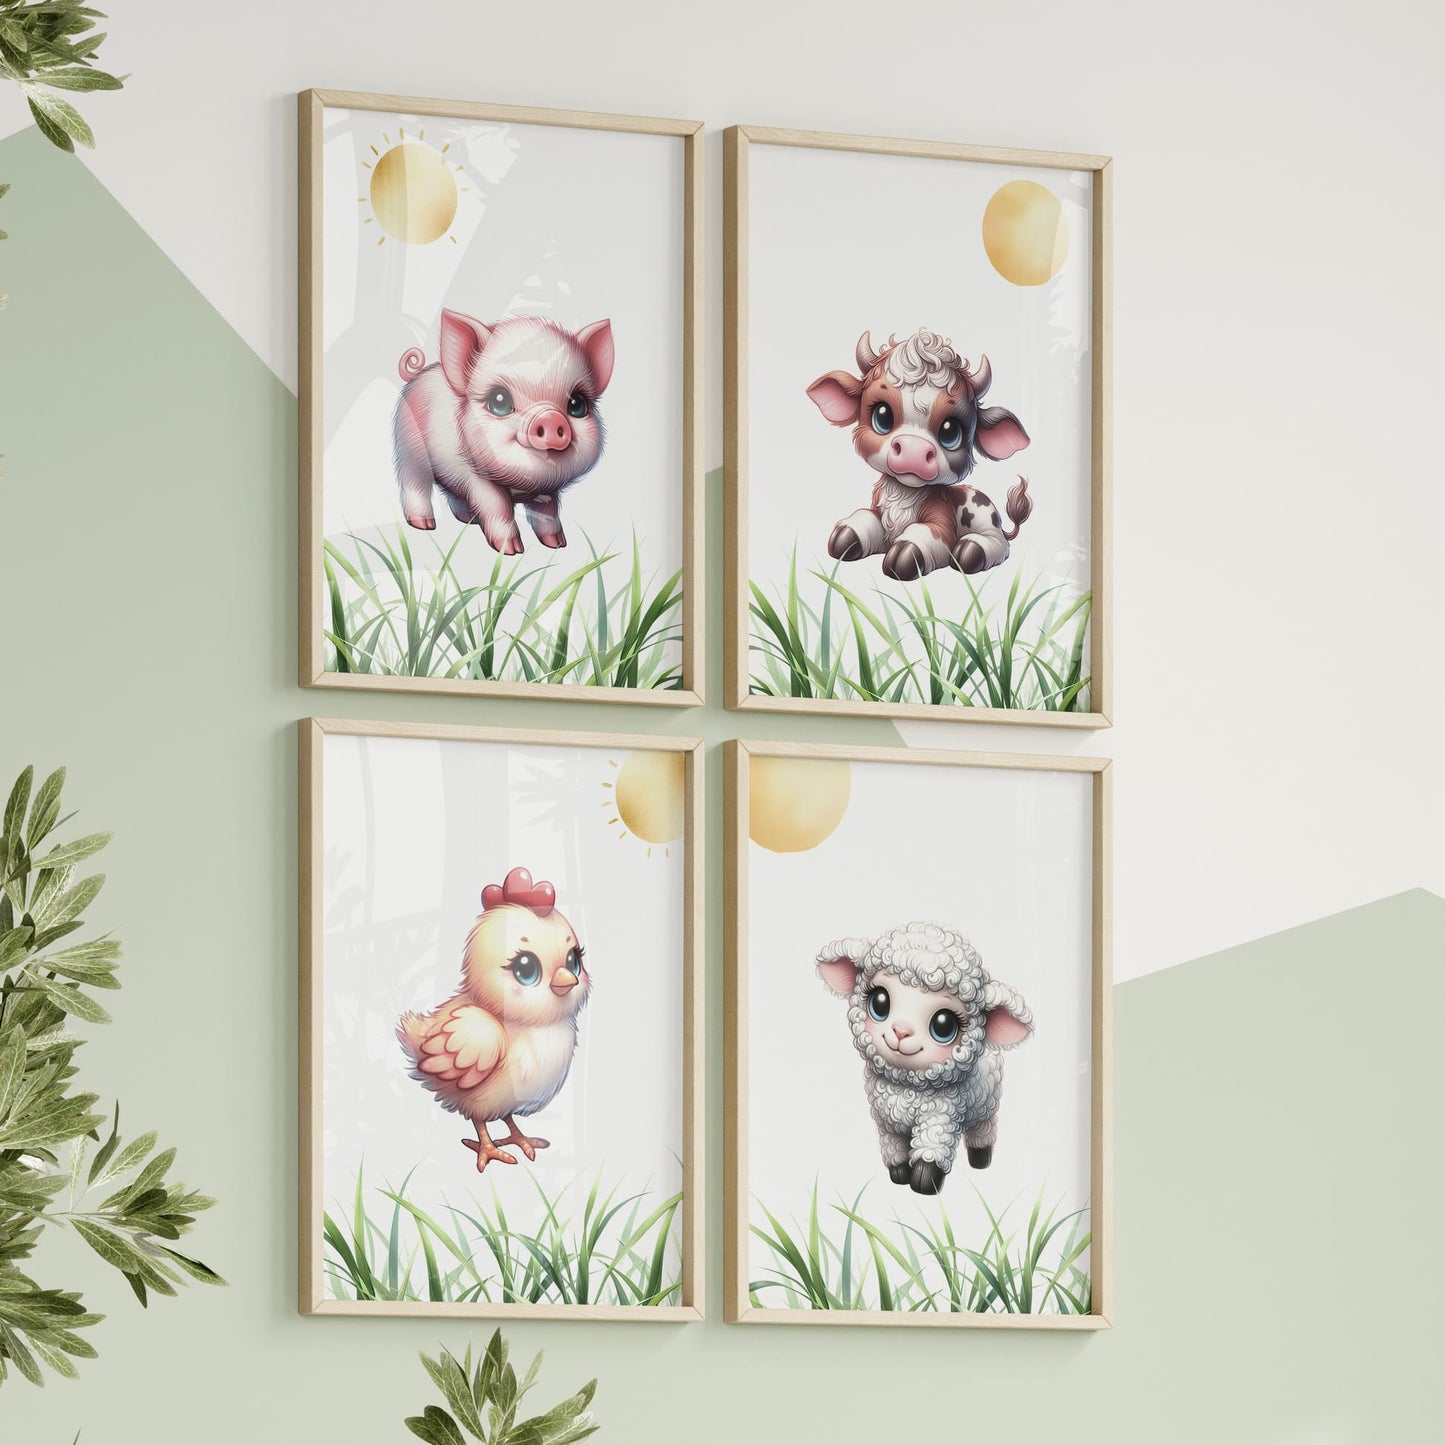 Set of four A4 prints featuring baby farm animals - cow, pig, chick and lamb. The animals are depicted in a cartoony, bright style resembling coloured pencil drawings. Each print depicts grass along the bottom and a sun above the animal.